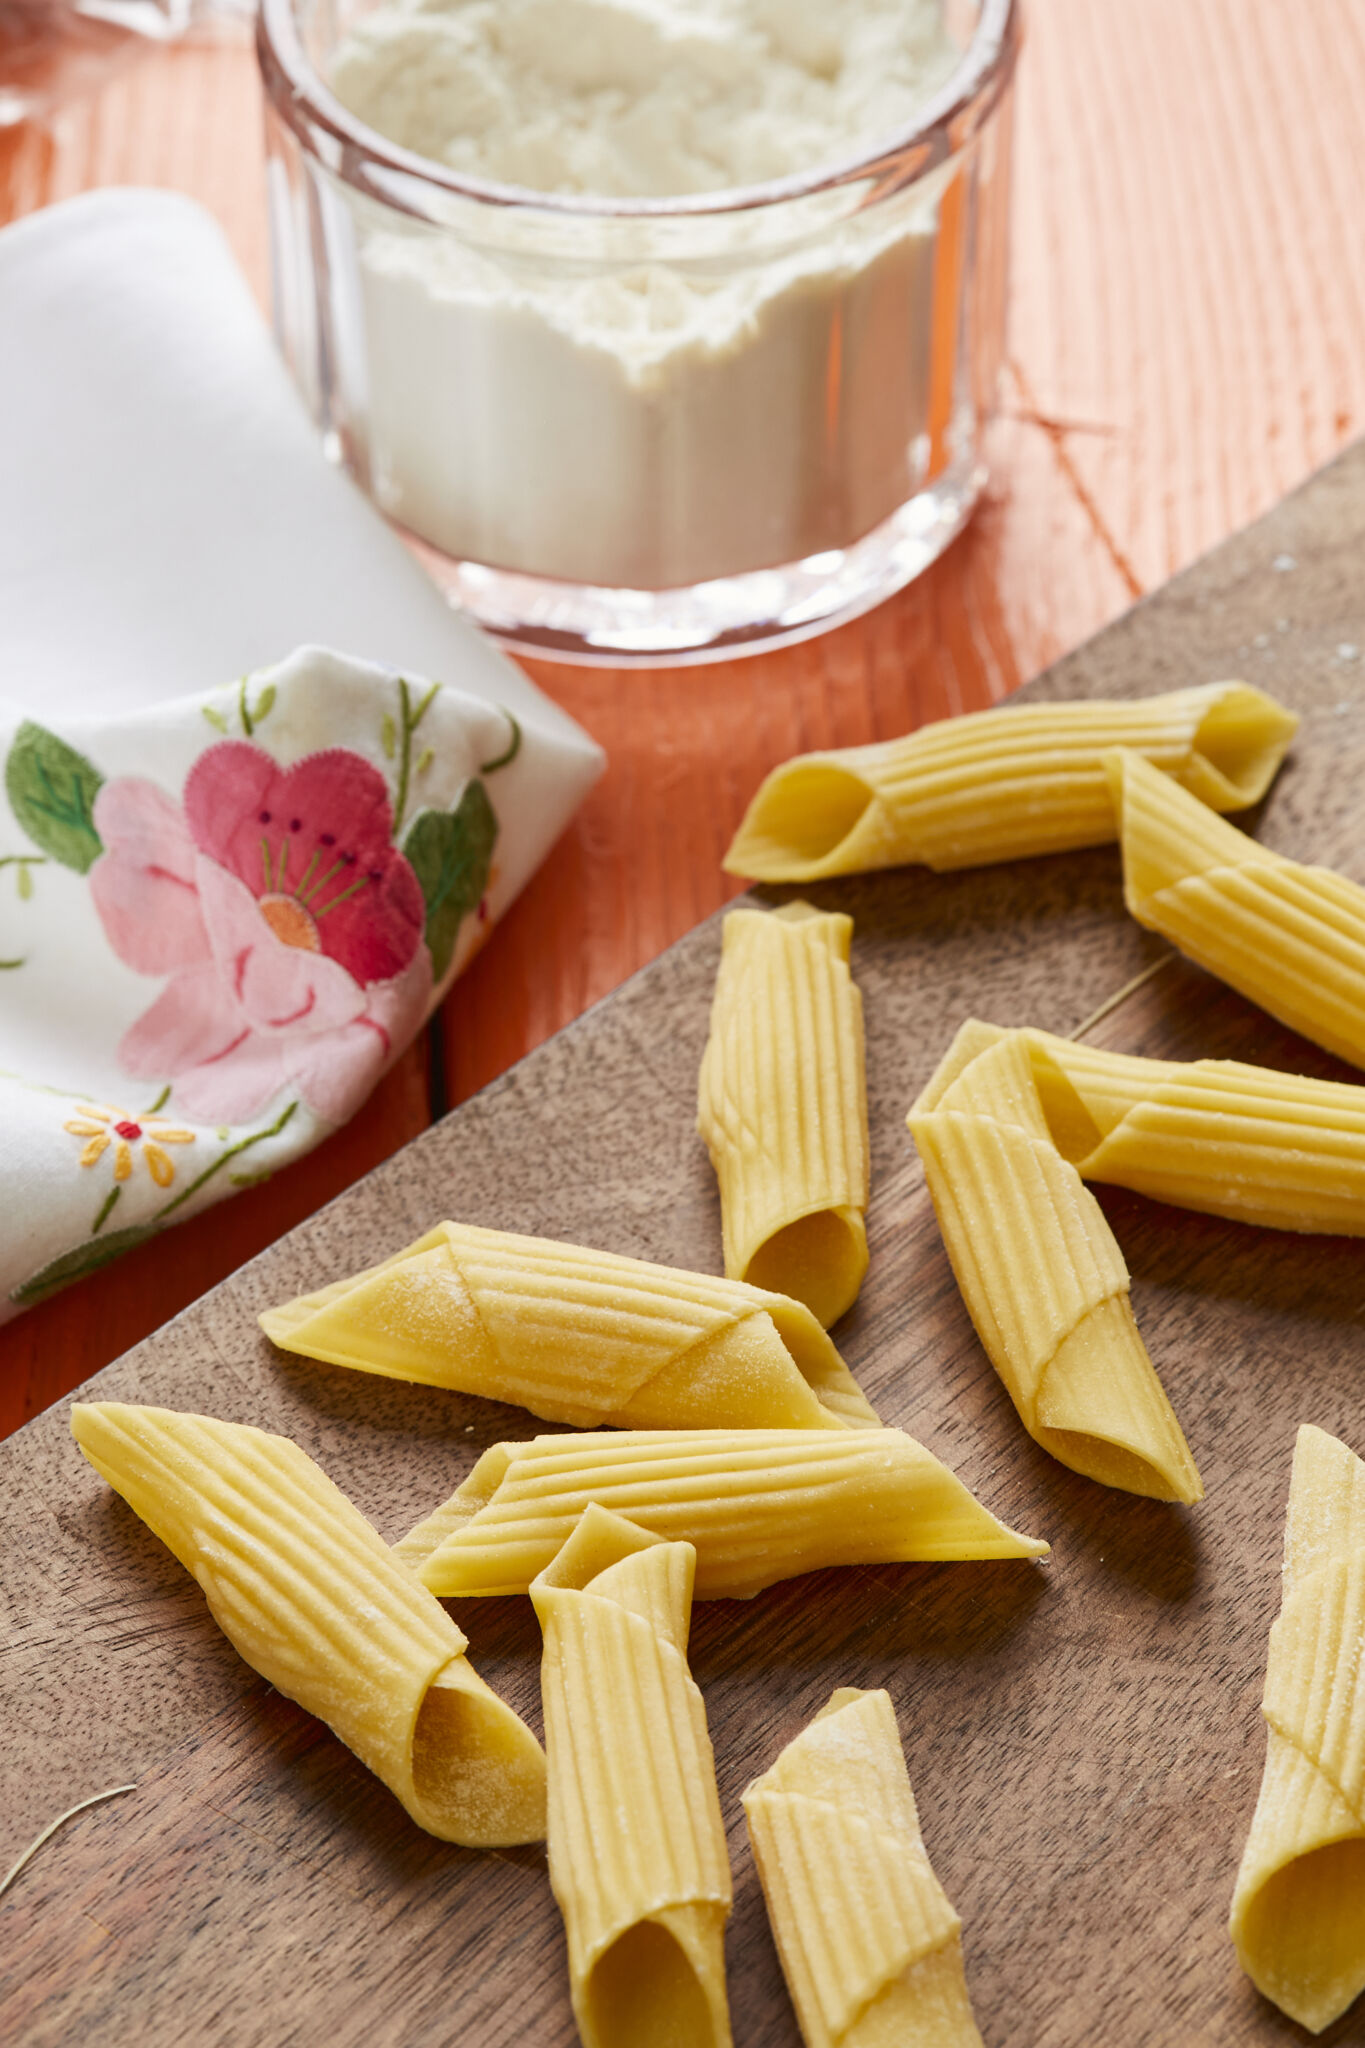 Penne pasta is drying on a wooden board. It's an eggless tubular-shaped pasta, cut diagonally on the ends and resembles an old-fashioned writing quill that was dipped in ink. A small glass bowl of flour is on the side.